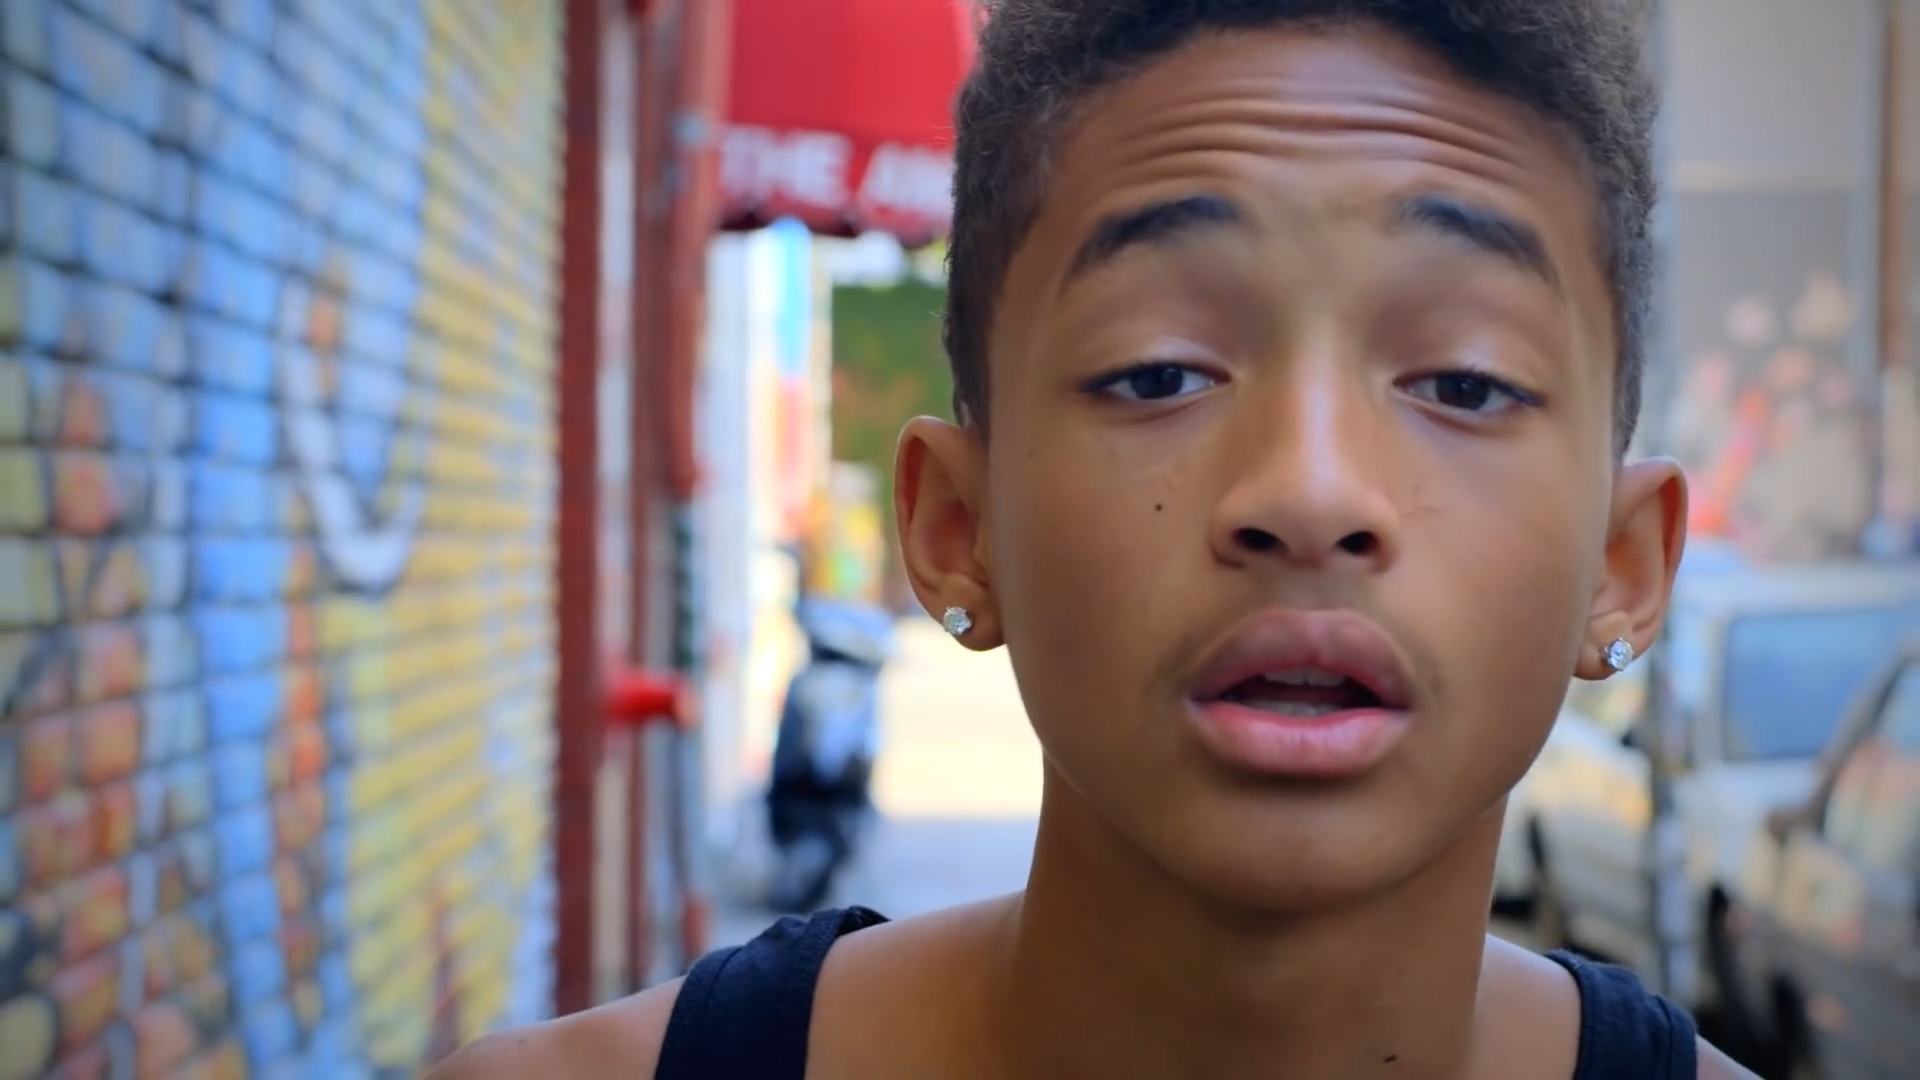 Picture Of Jaden Smith In Music Video The Coolest Jaden Smith 1643333318 Teen Idols 4 You 9161